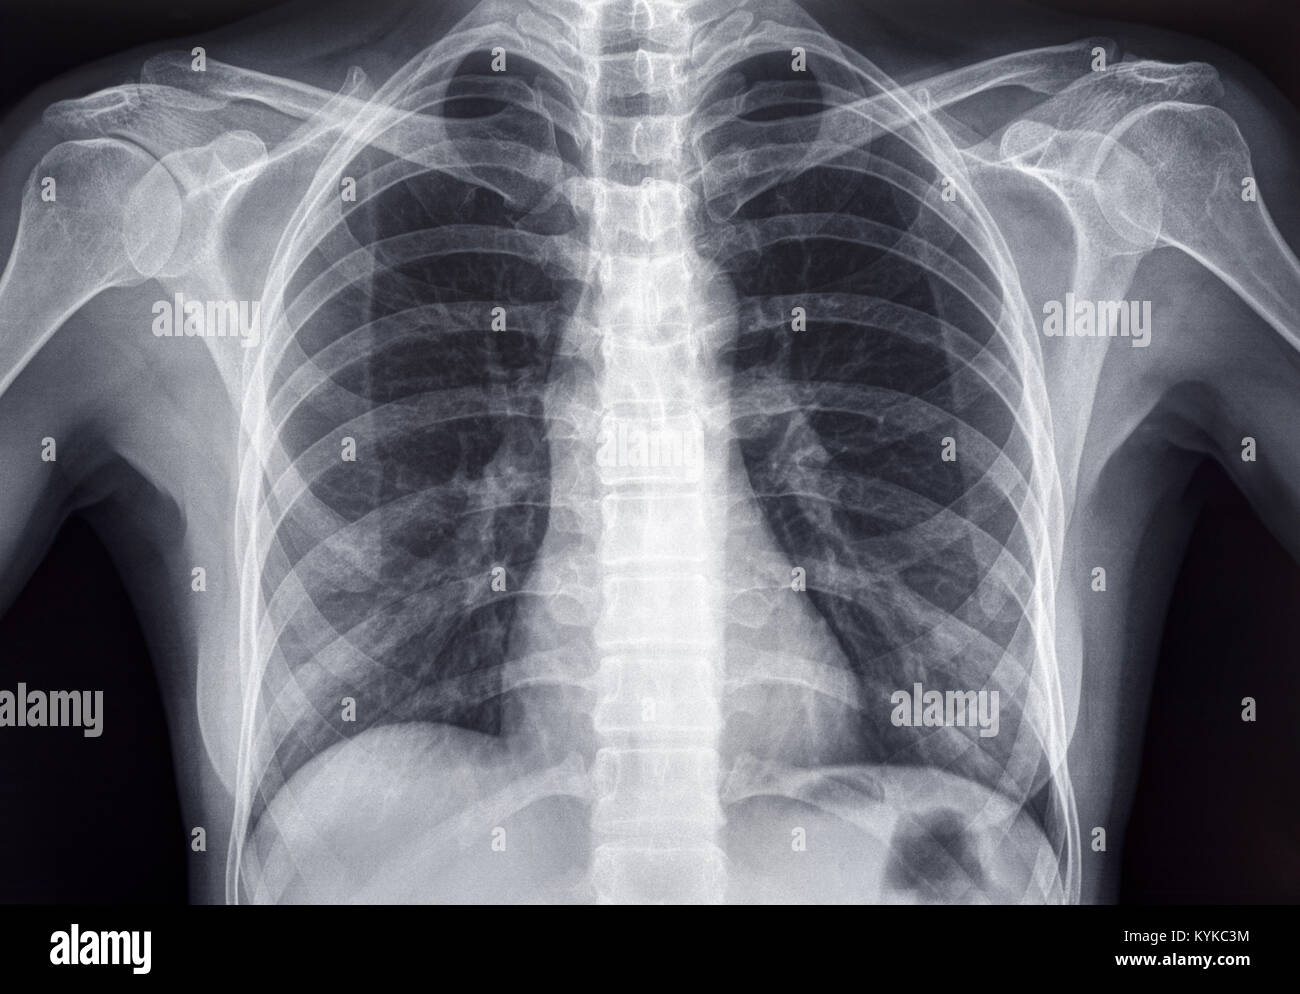 Chest X-ray of an Adult Female Human Stock Photo